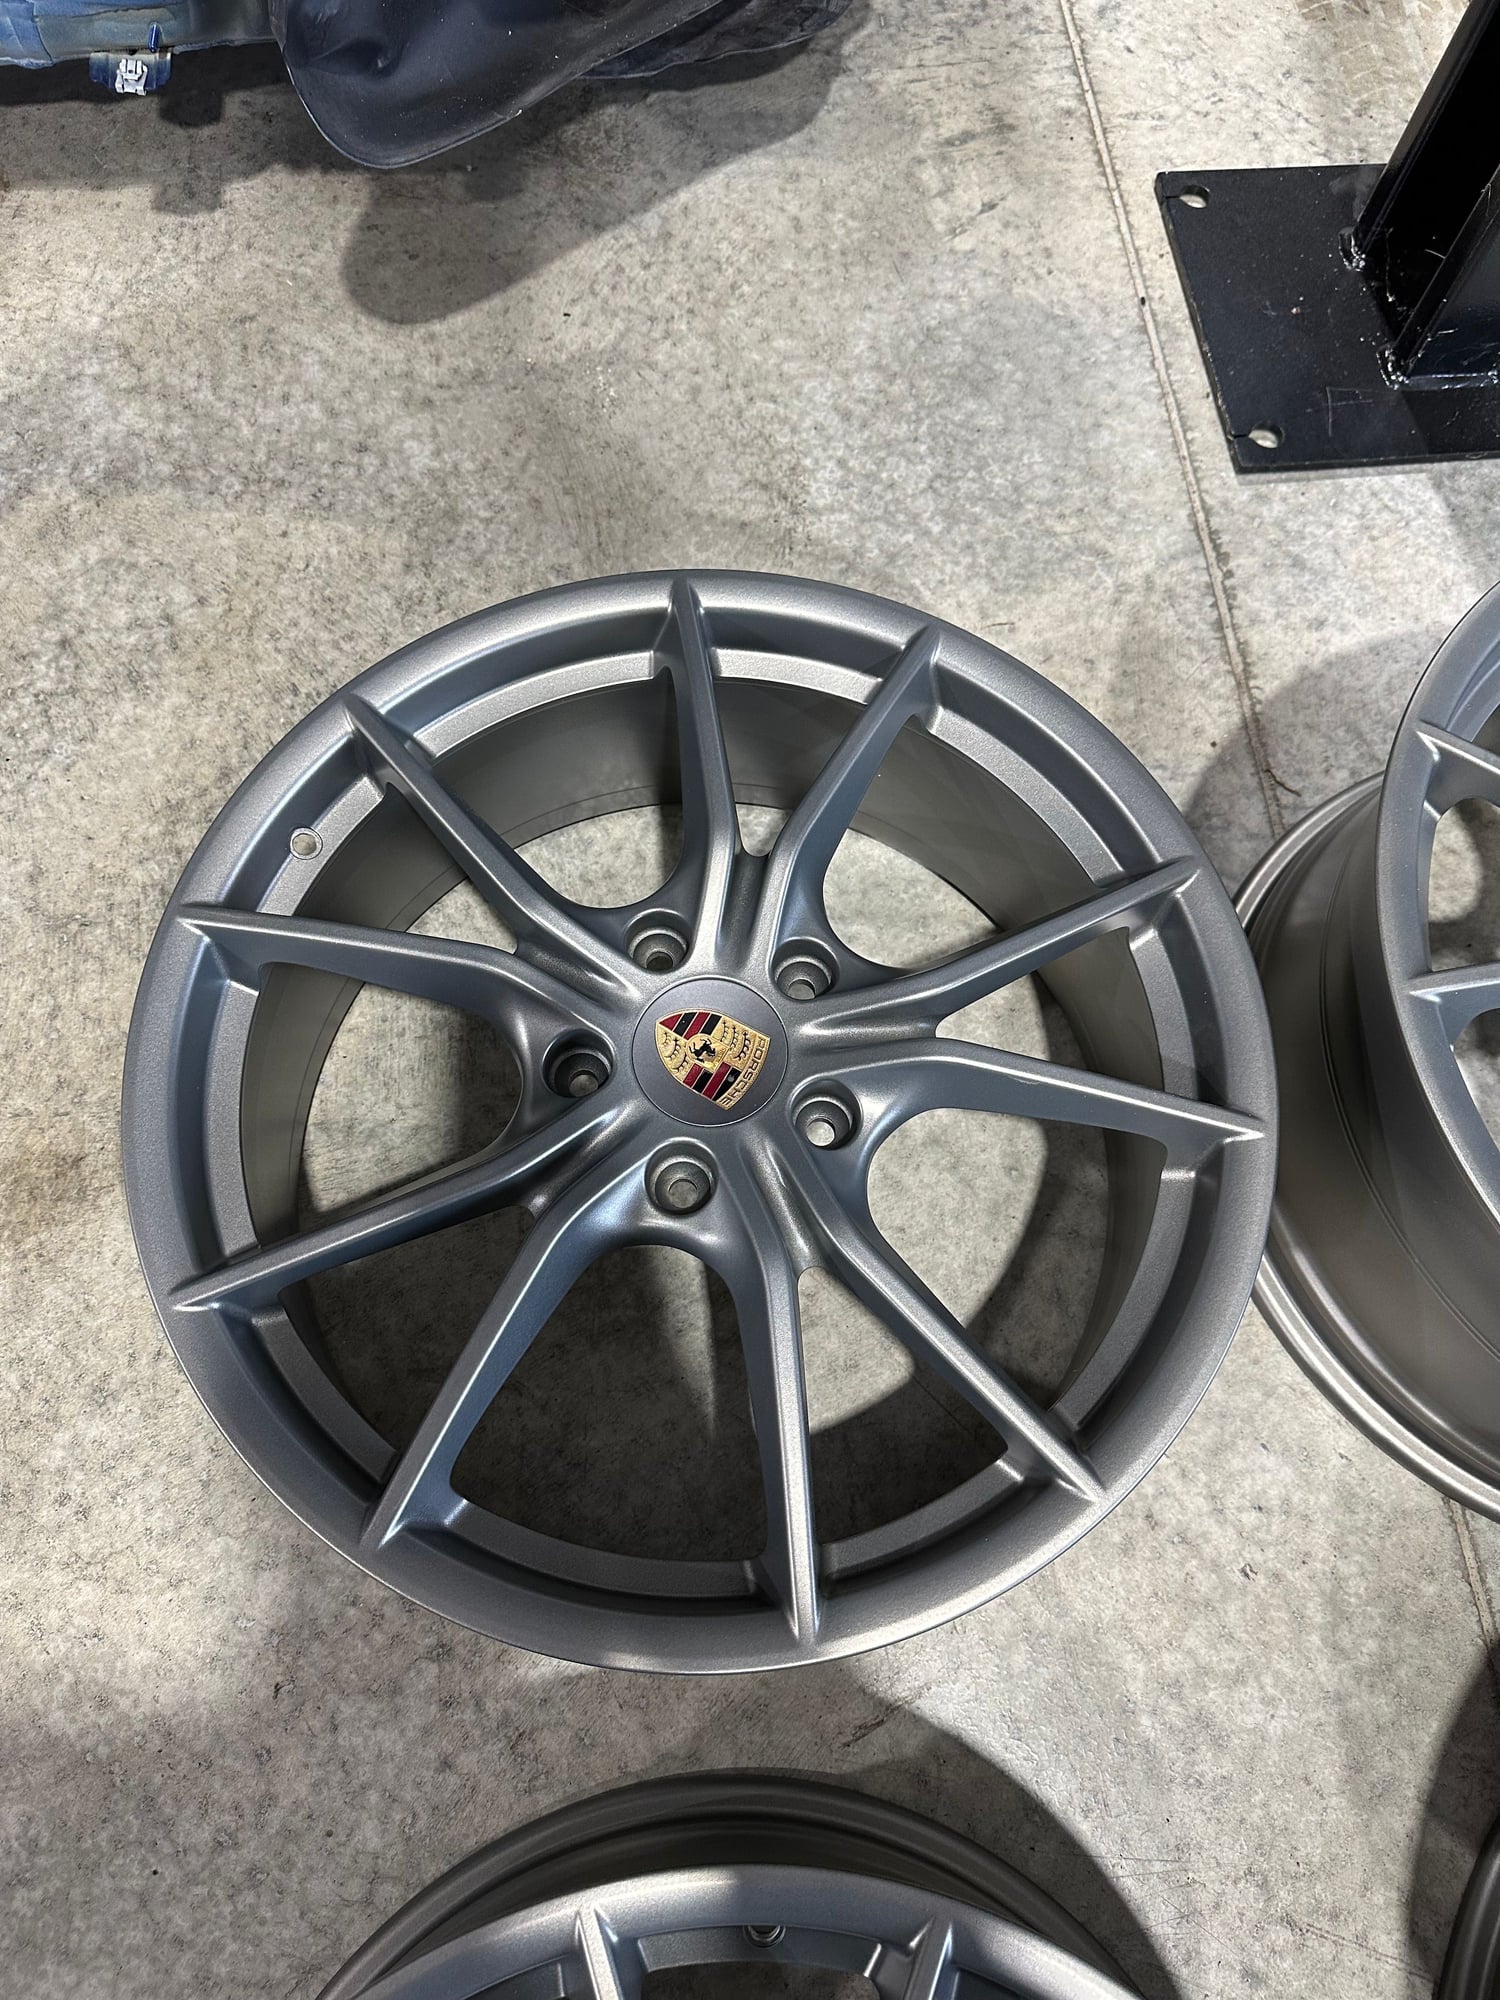 Wheels and Tires/Axles - FS: 20” 718/981 Carrera II platinum satin just refinished like new - Used - All Years  All Models - Saint Joseph, MO 64504, United States